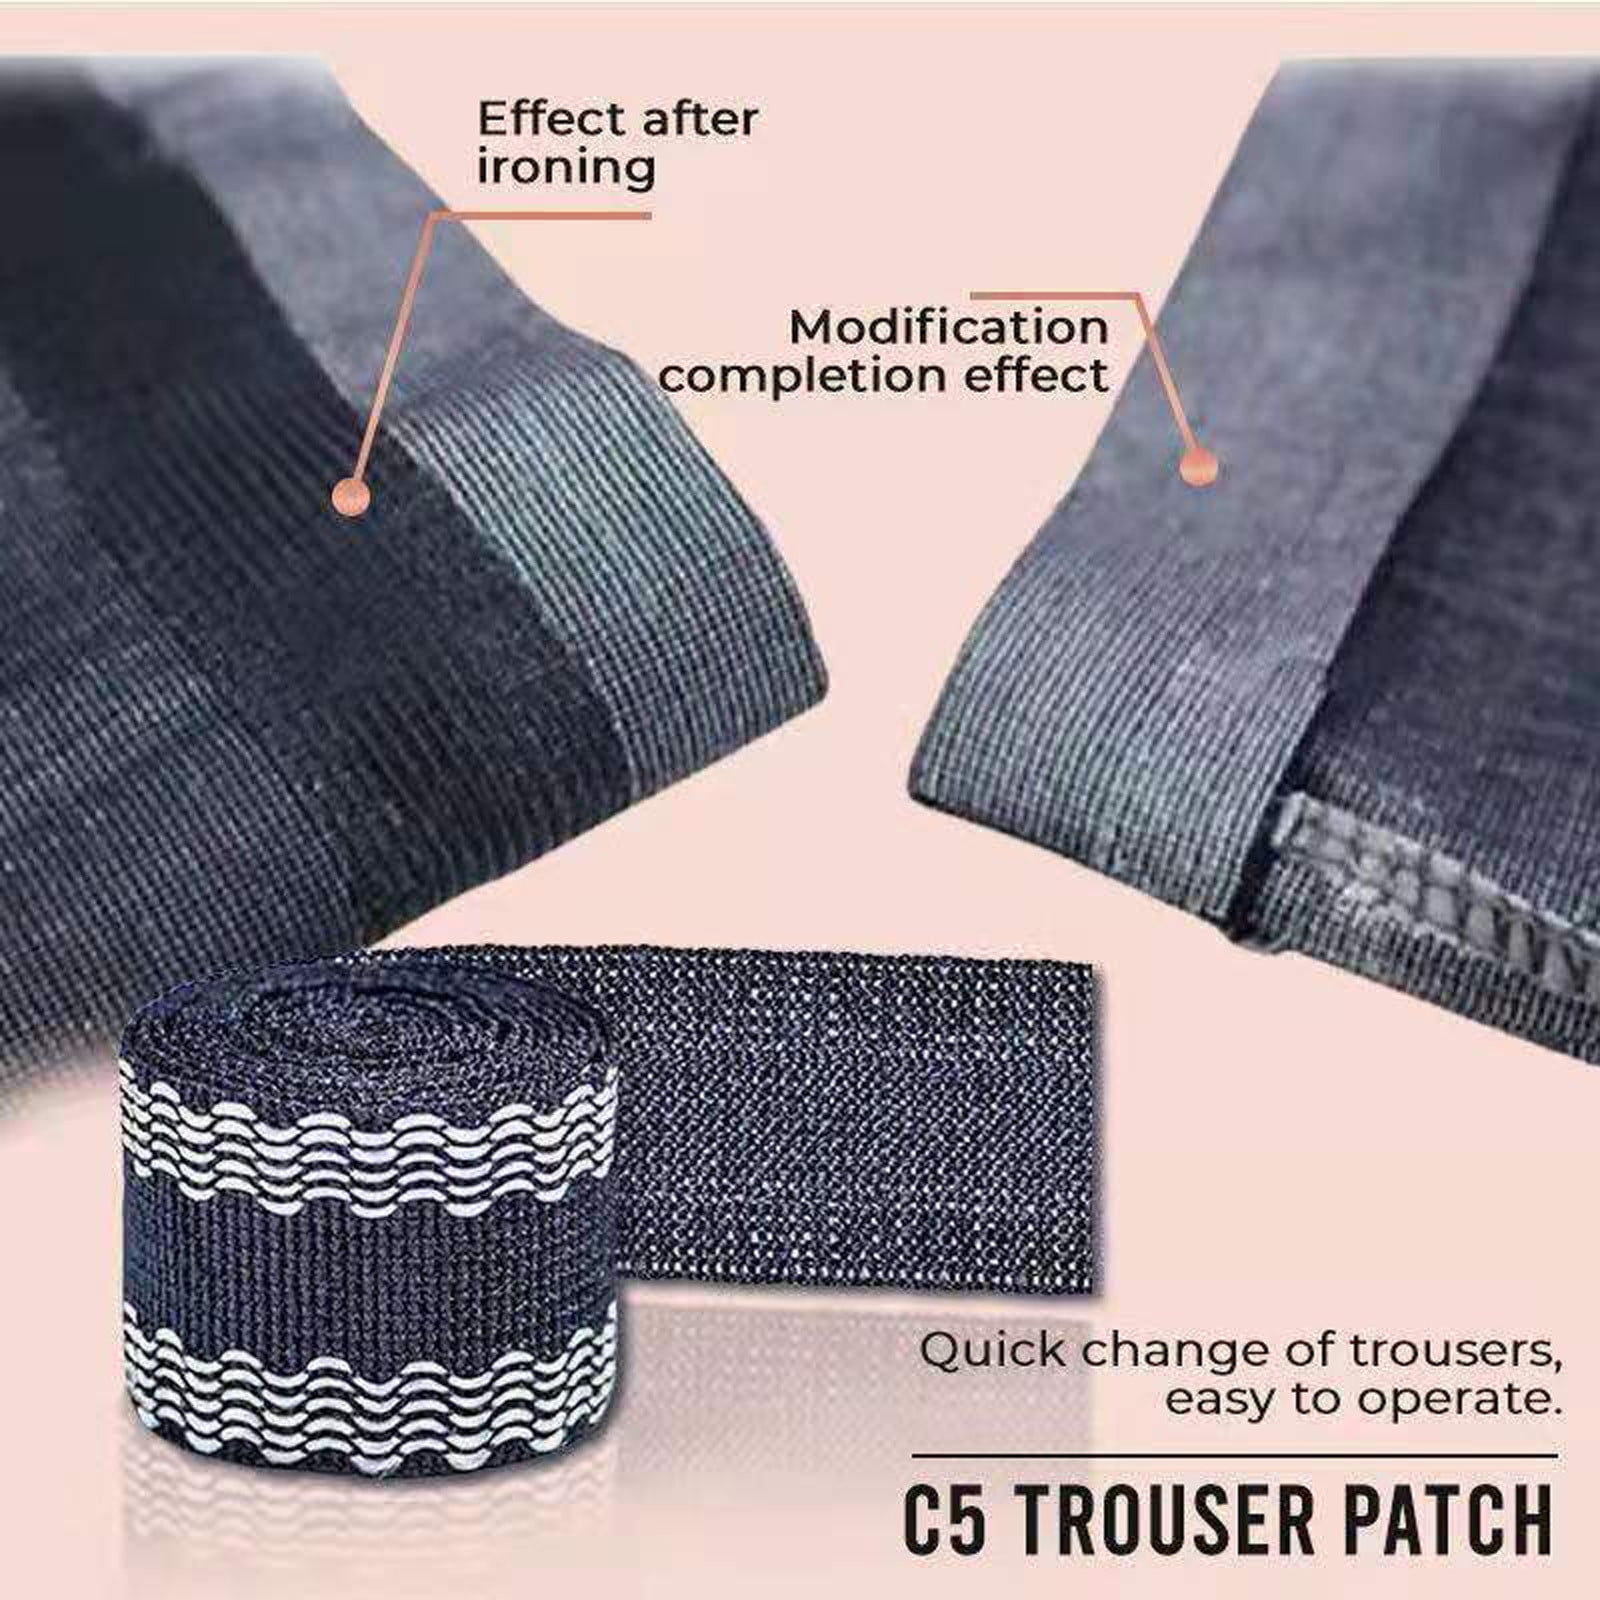  TRGGBH Self-Adhesive Hem Tape for Edge Shorten Pants Curtains  Dress Jeans Clothes, No Sew No Iron Hemming Tape, Iron on Fabric Sewing Tape  Adhesive, Soft and Cozy, Easy to Clean, 3.3